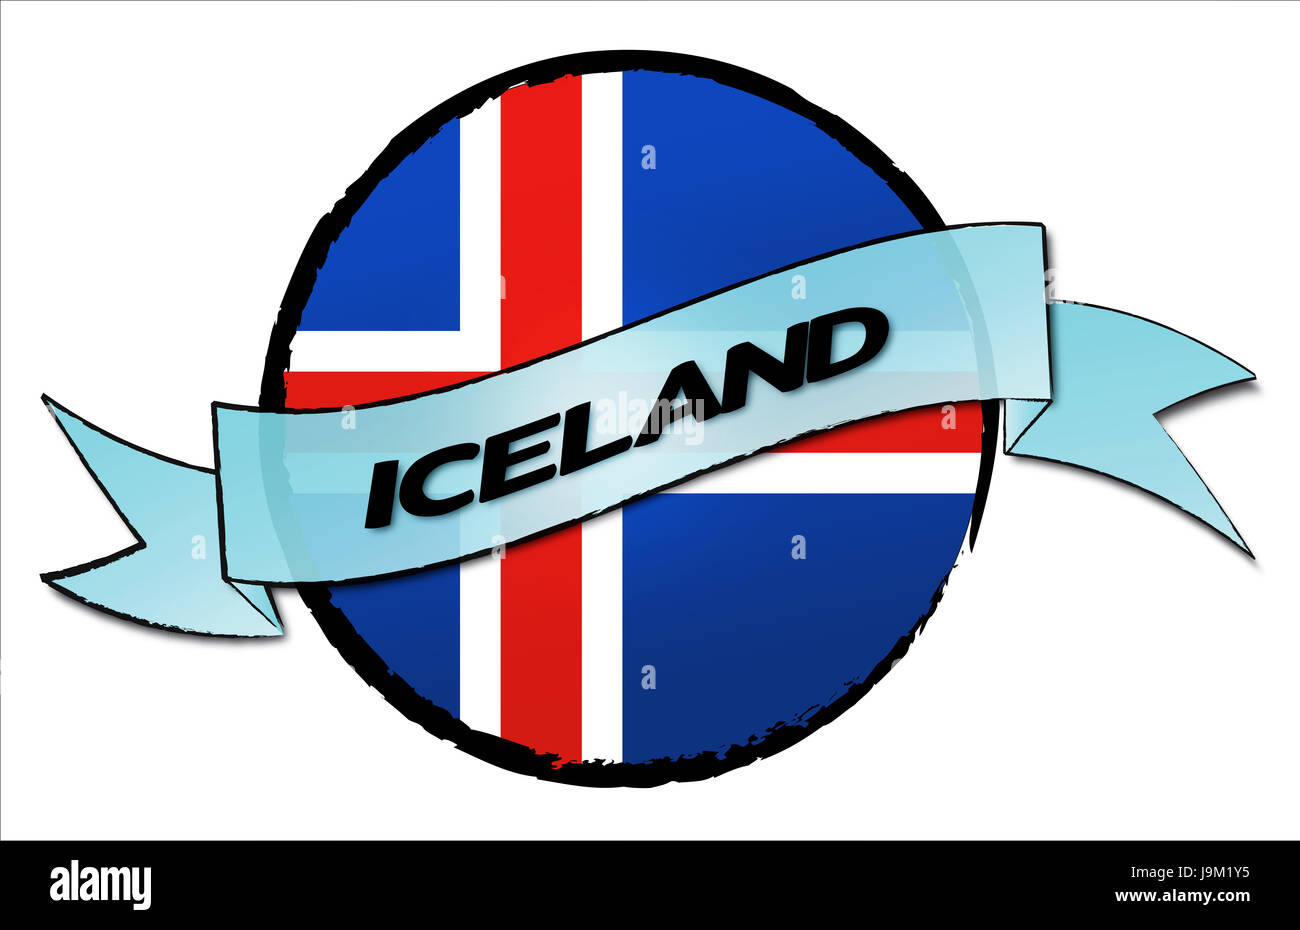 iceland, island, geyser, isle, flag, trip, button, banner, iceland, country, Stock Photo